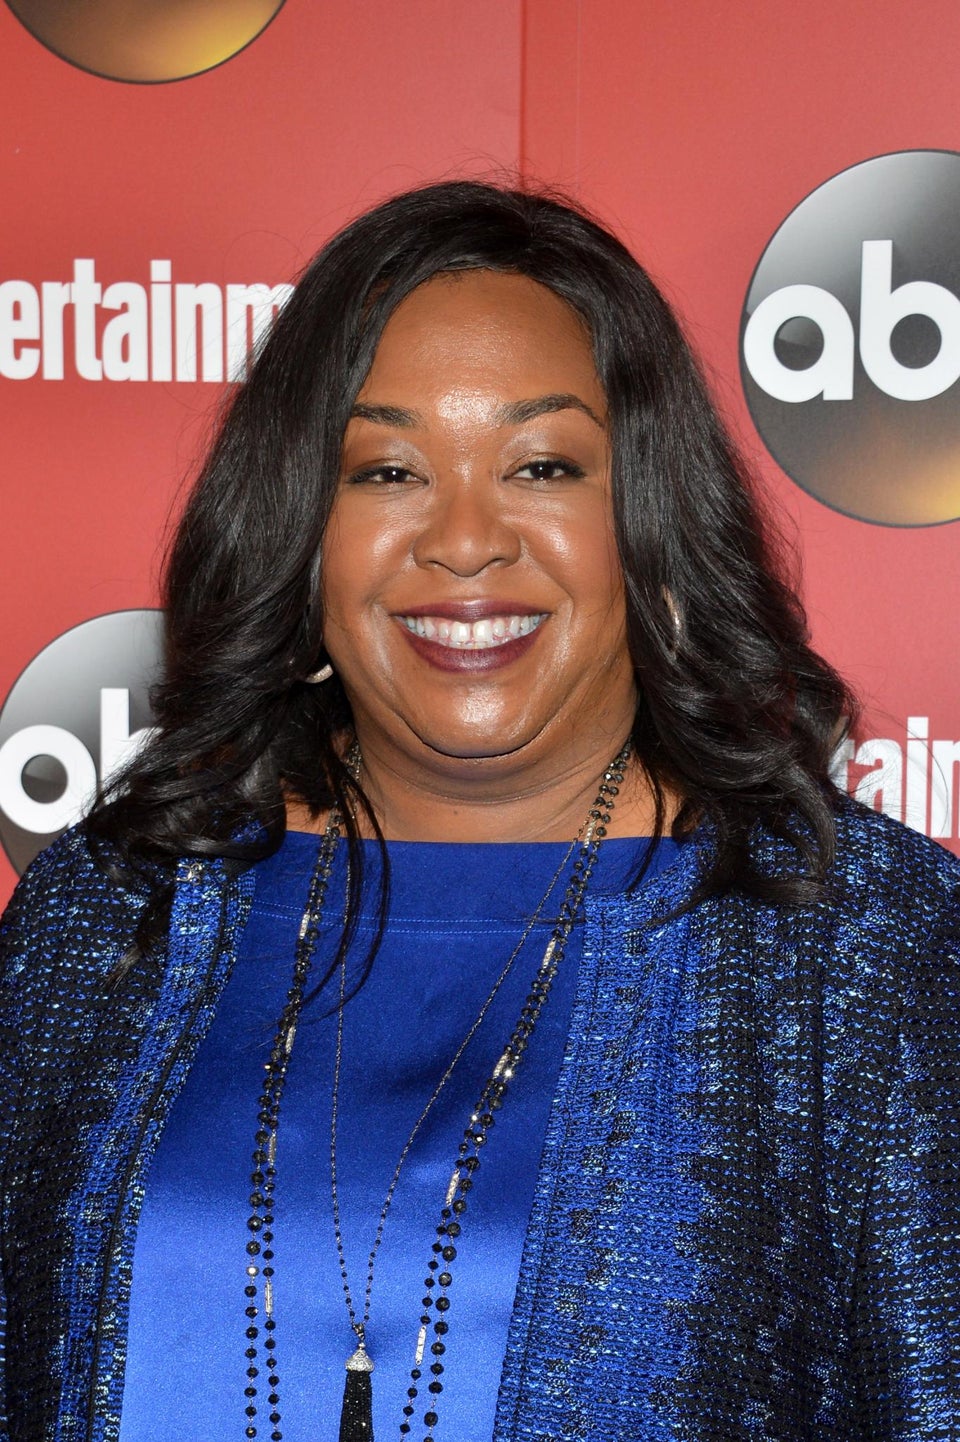 See Shonda Rhimes’ Brilliant Response to Being Called An ‘Angry Black Woman’ By A TV Critic